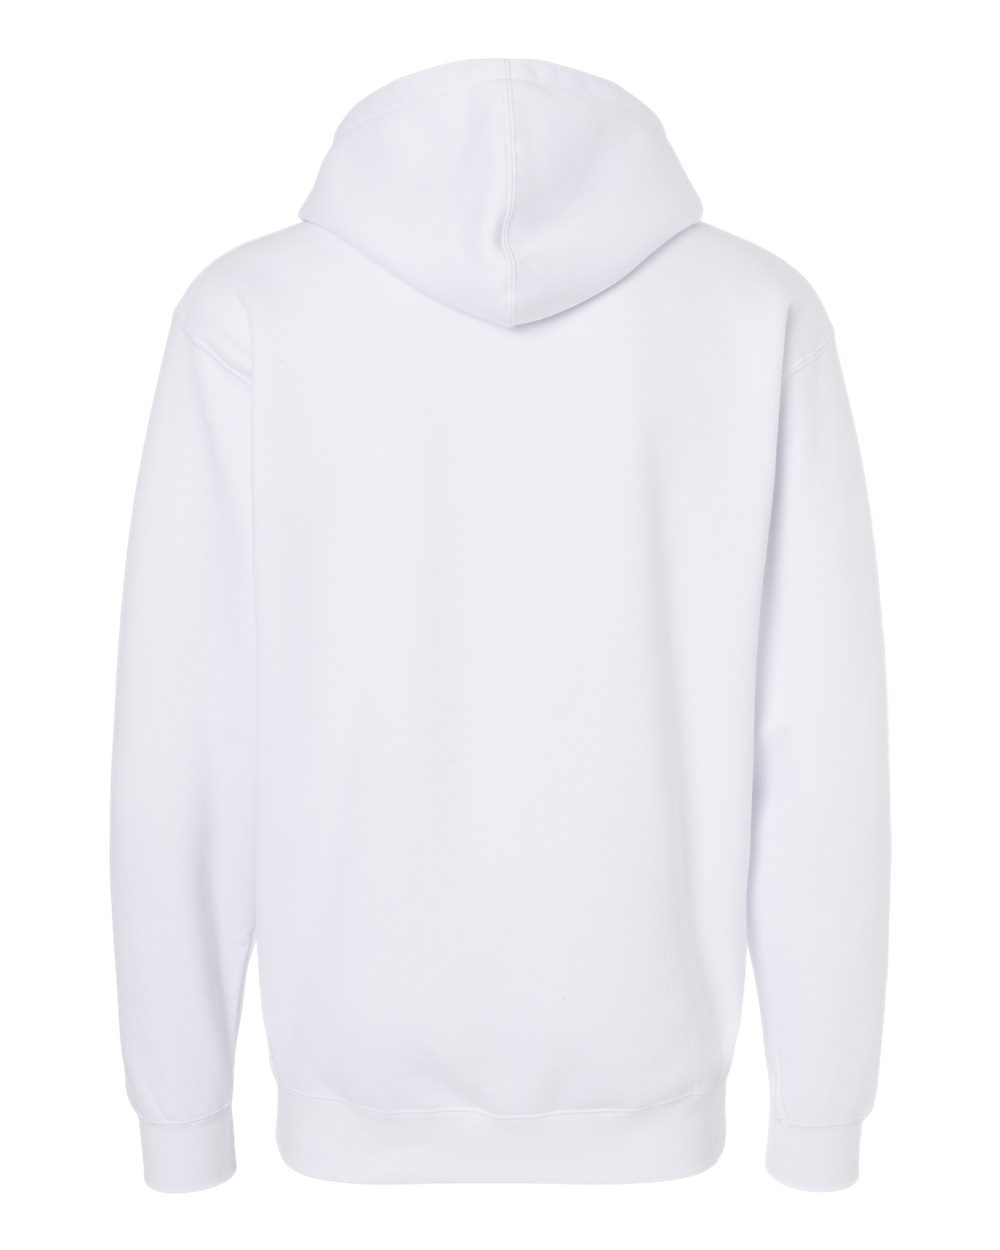 Independent Trading Co. IND4000 Heavyweight Hooded Sweatshirt–Saddle (3XL)